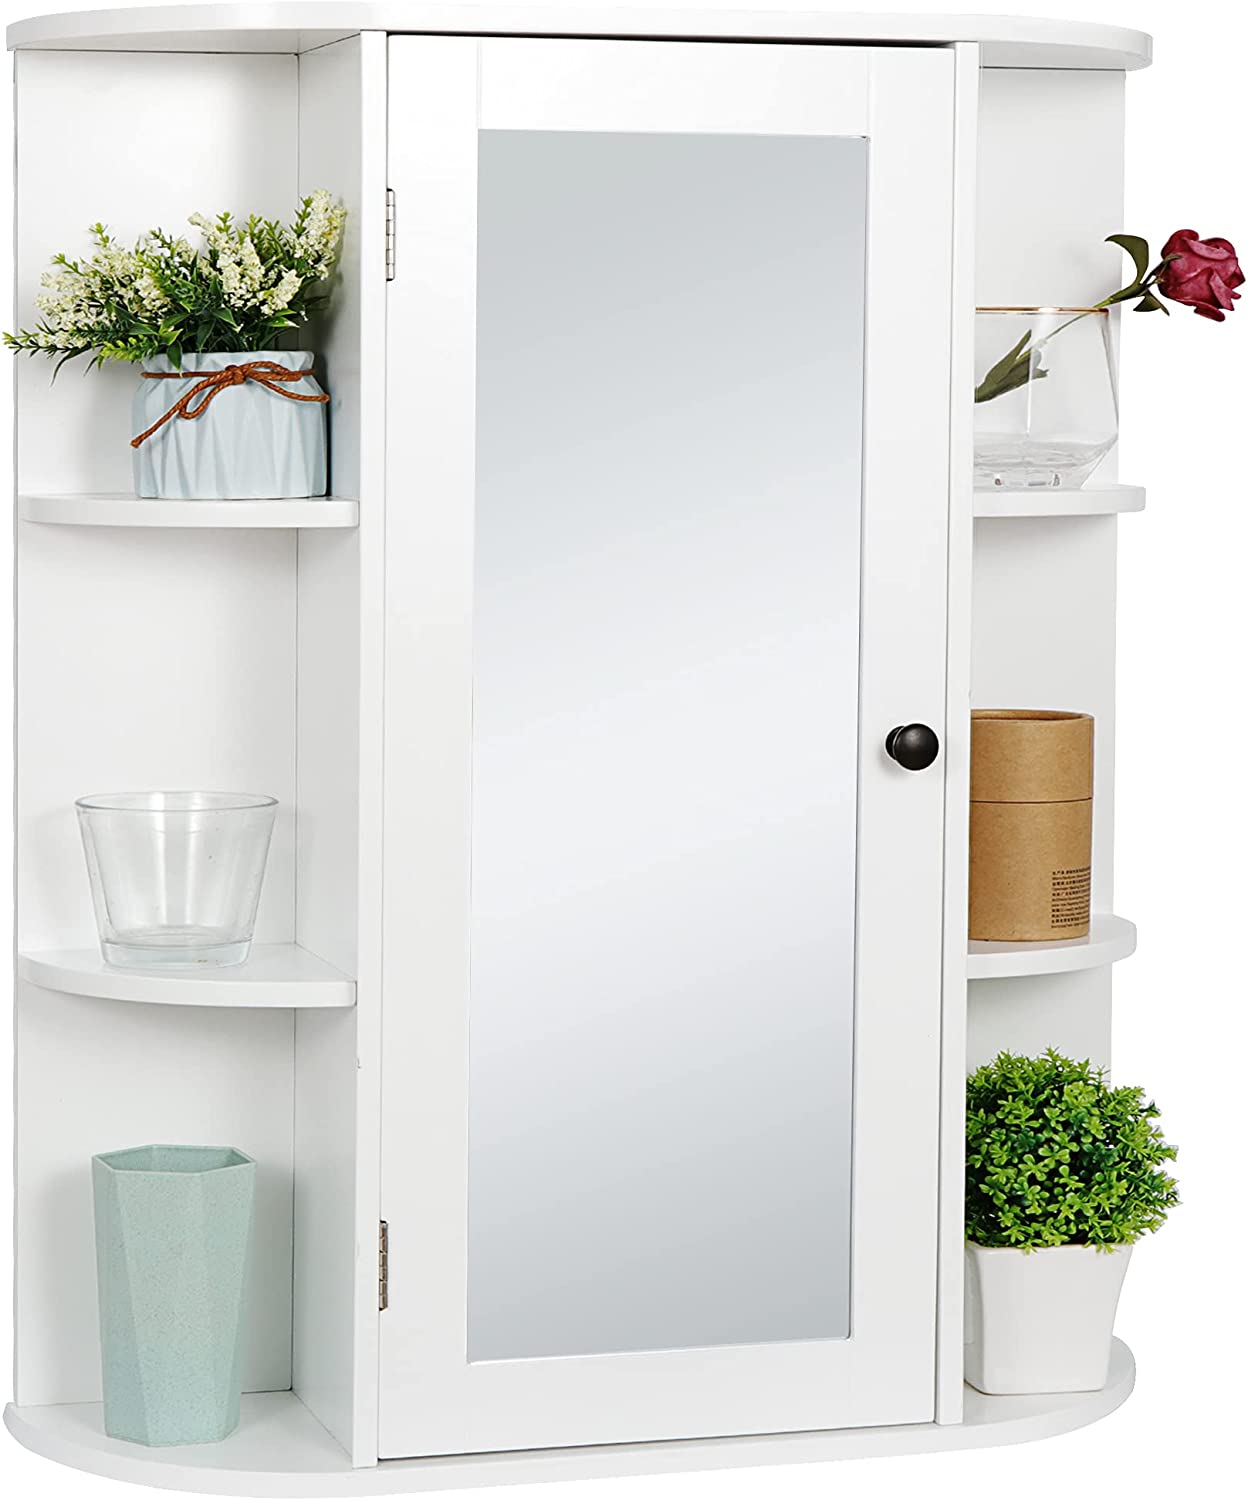 Bathroom Cabinet with Mirror Wall Mount Medicine Cabinet with 2 Tier Inner Adjustable Shelves Wooden Storage Cabinets Organizer